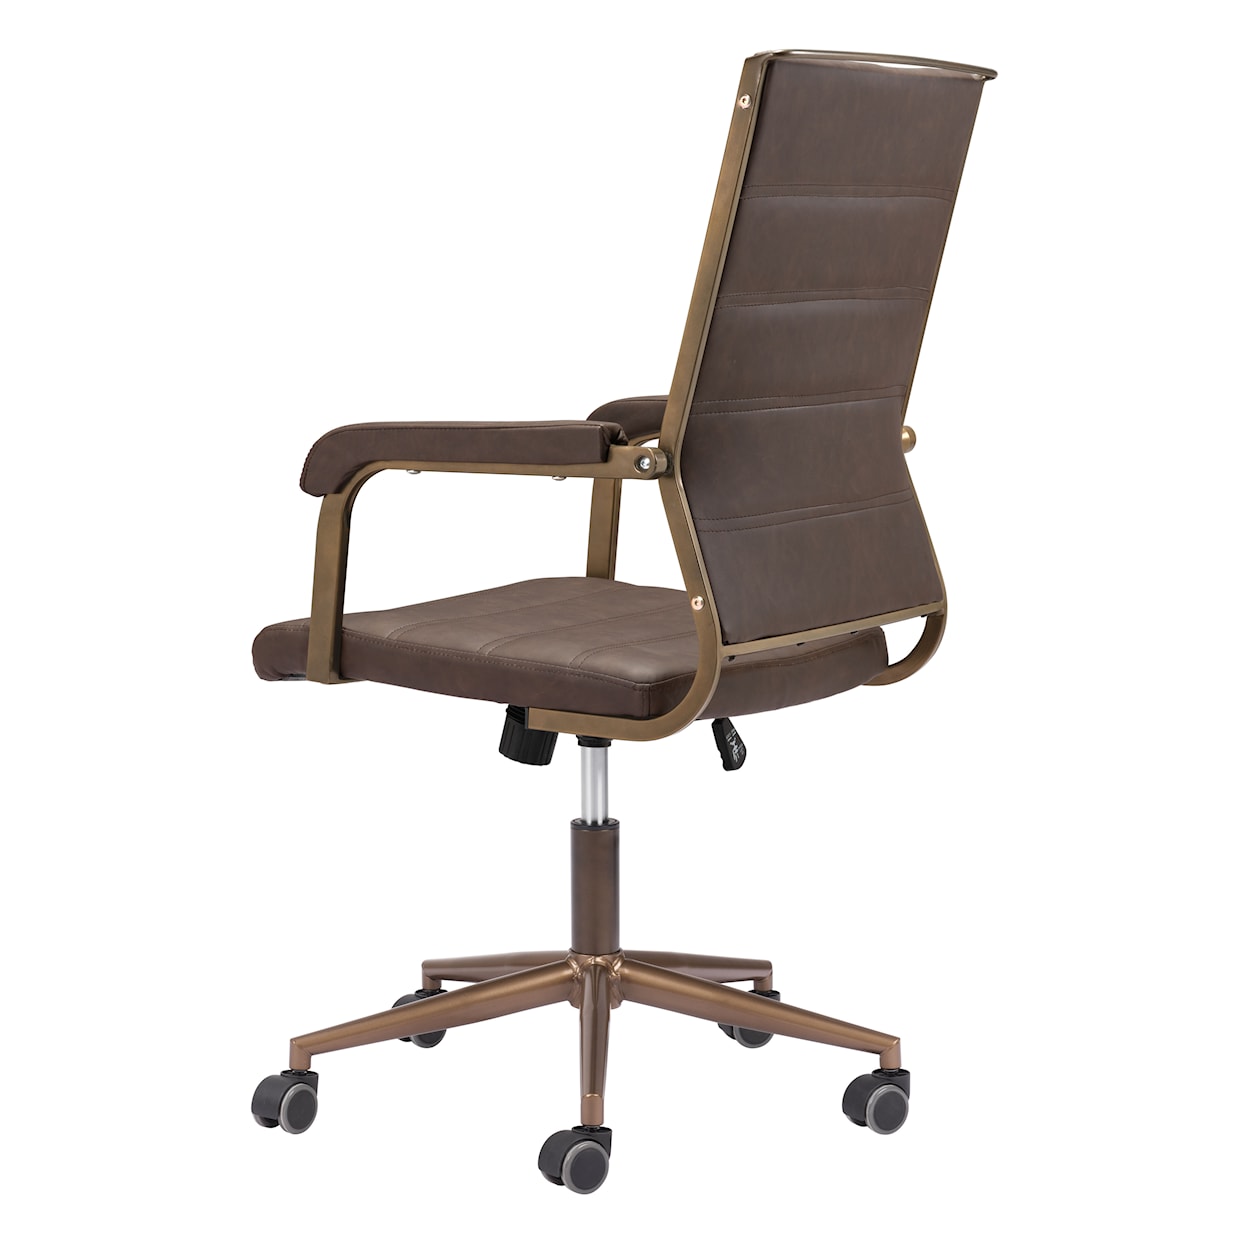 Zuo Auction Office Chair